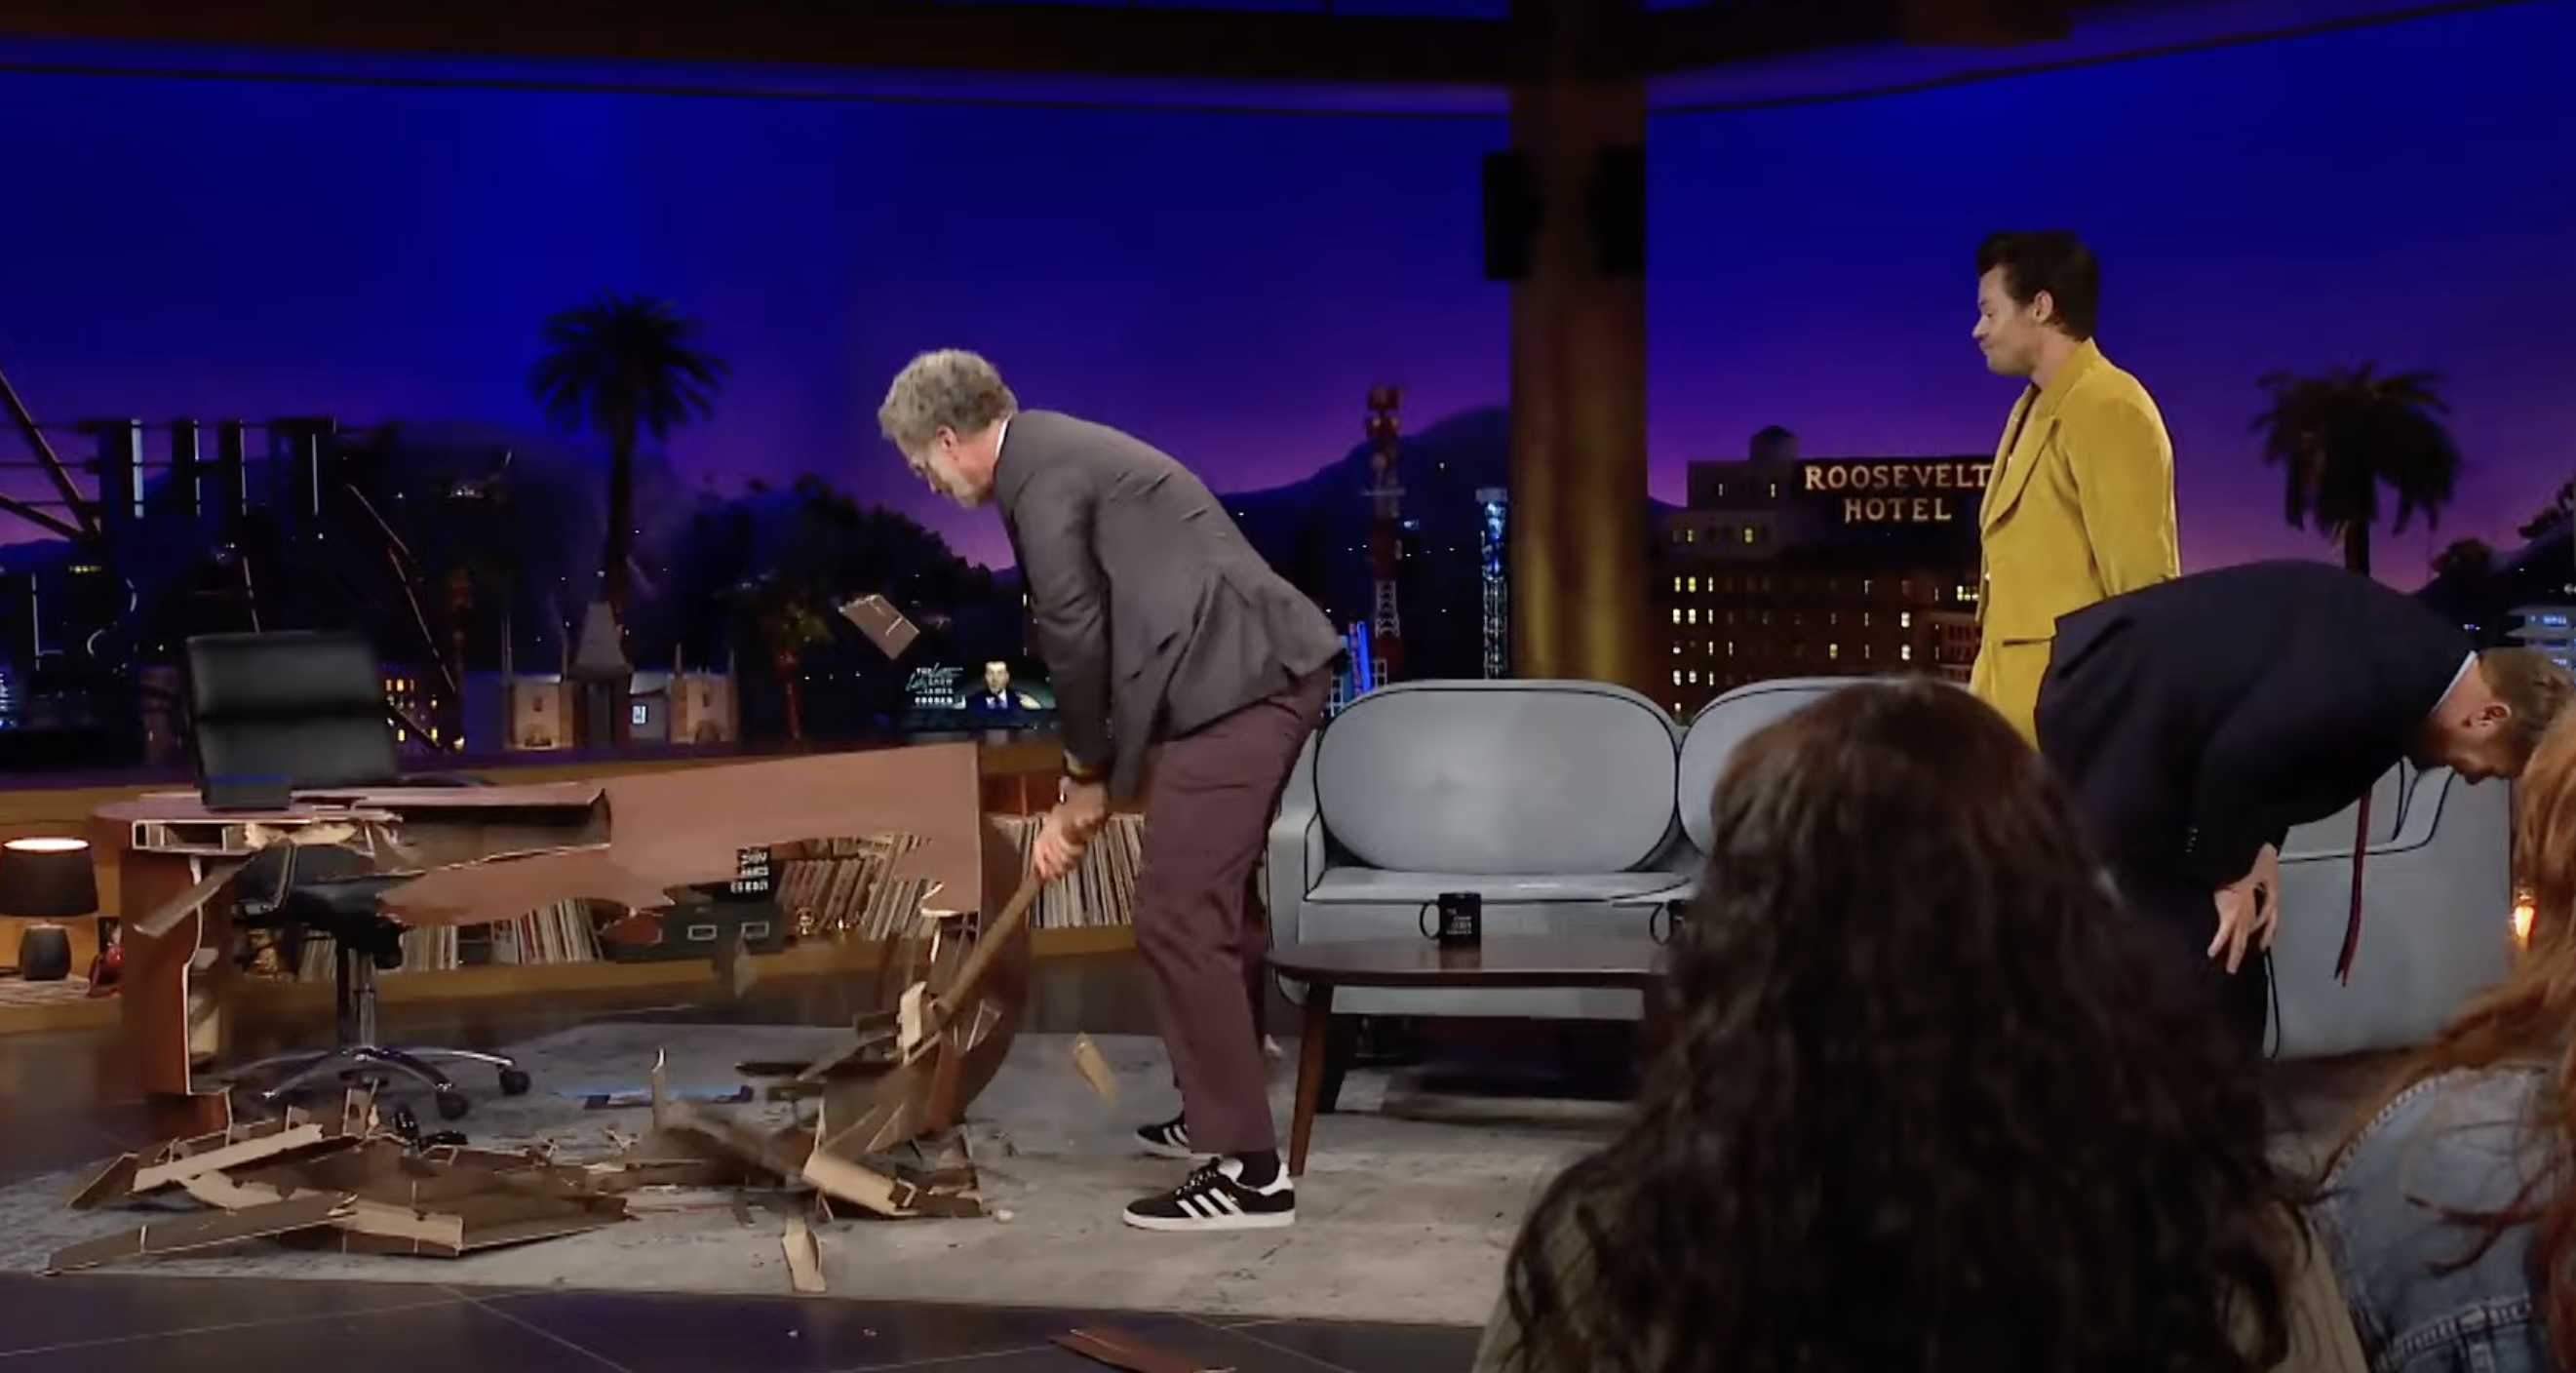 Will Ferrell And Harry Styles Demolish James Corden's Desk With Sledgehammers On Epic The Late Late Show Finale